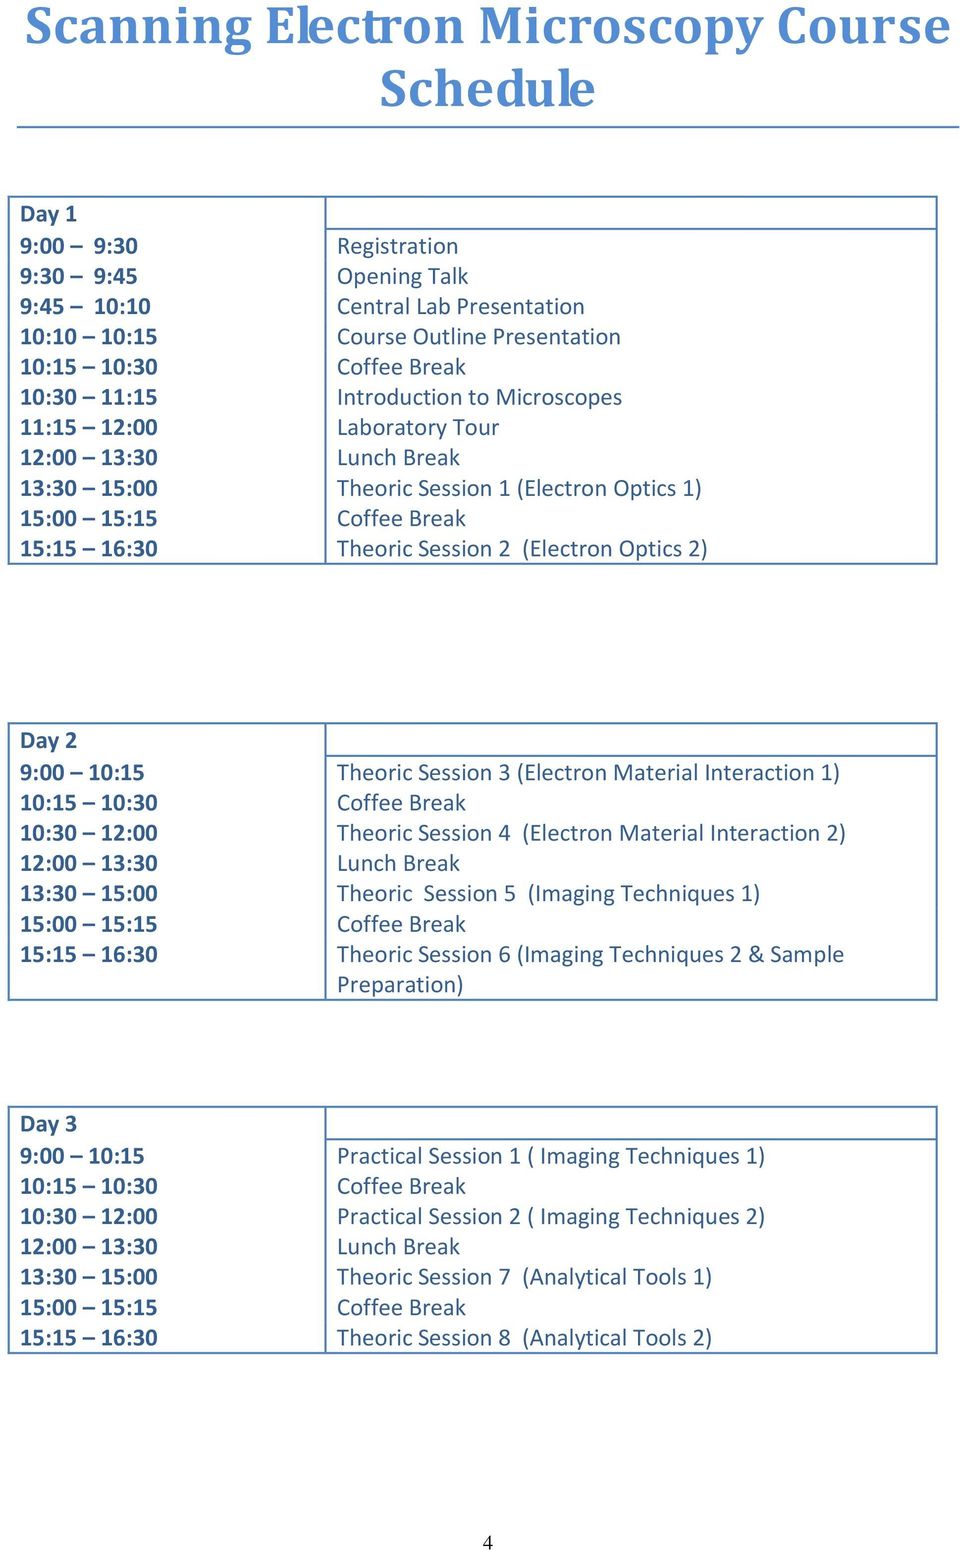 Interaction 1) 10:30 12:00 Theoric Session 4 (Electron Material Interaction 2) 13:30 15:00 Theoric Session 5 (Imaging Techniques 1) 15:15 16:30 Theoric Session 6 (Imaging Techniques 2 & Sample